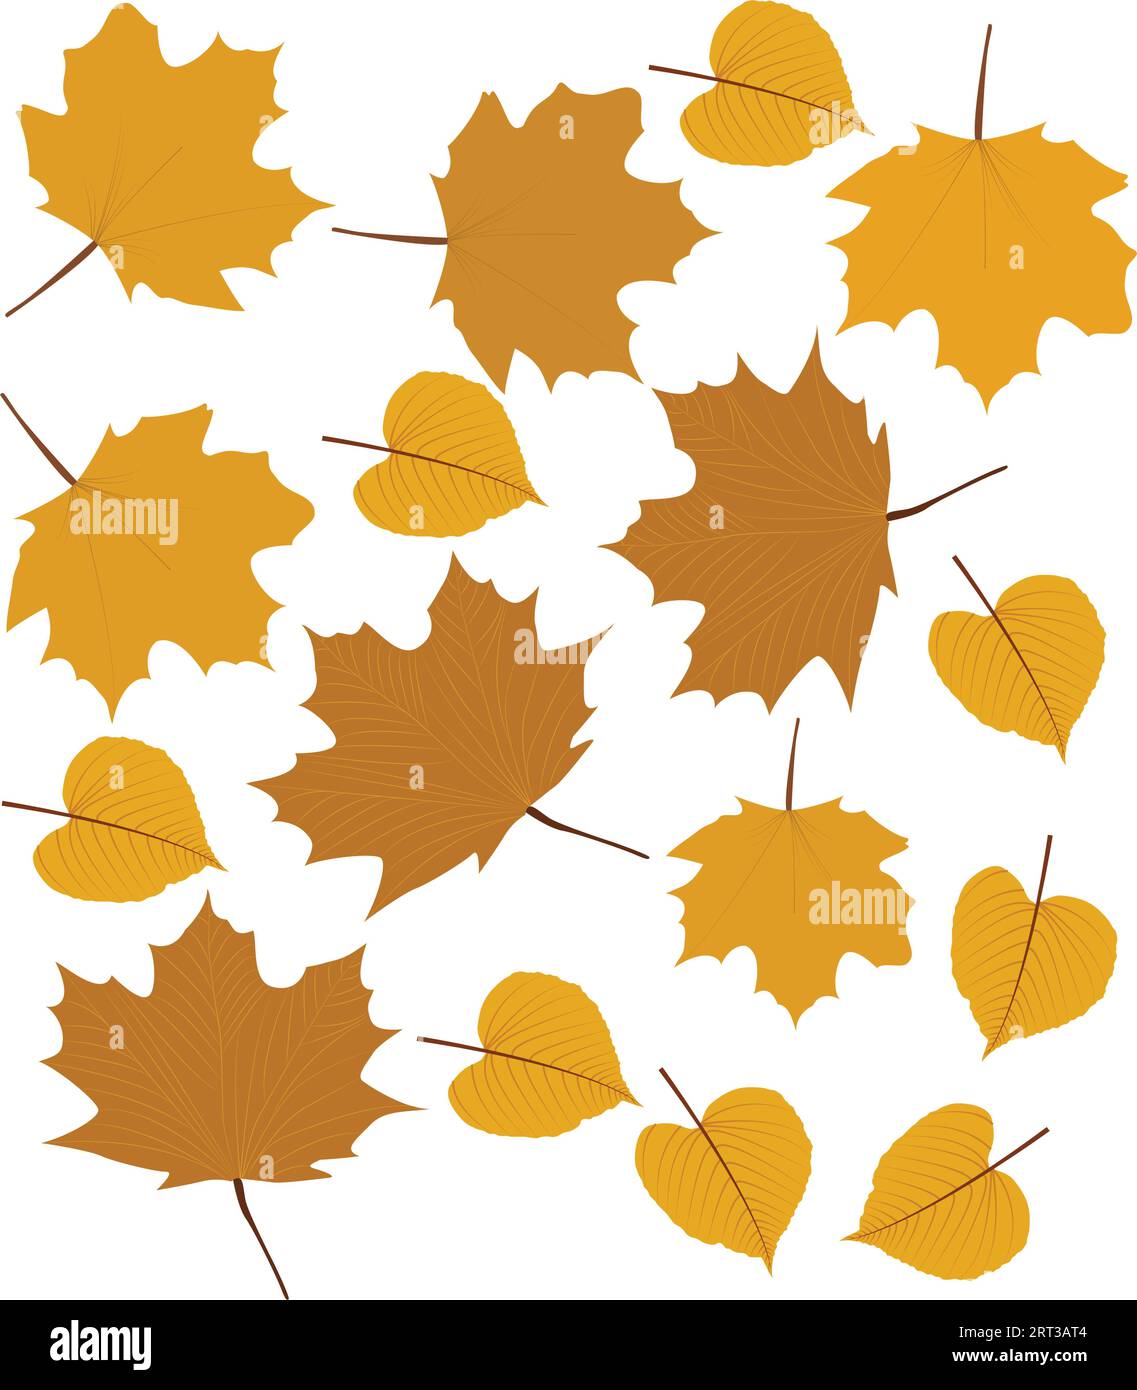 Fall leaves isolated on white background collection. Orange maple leaves pattern. Vector illustration. Stock Vector